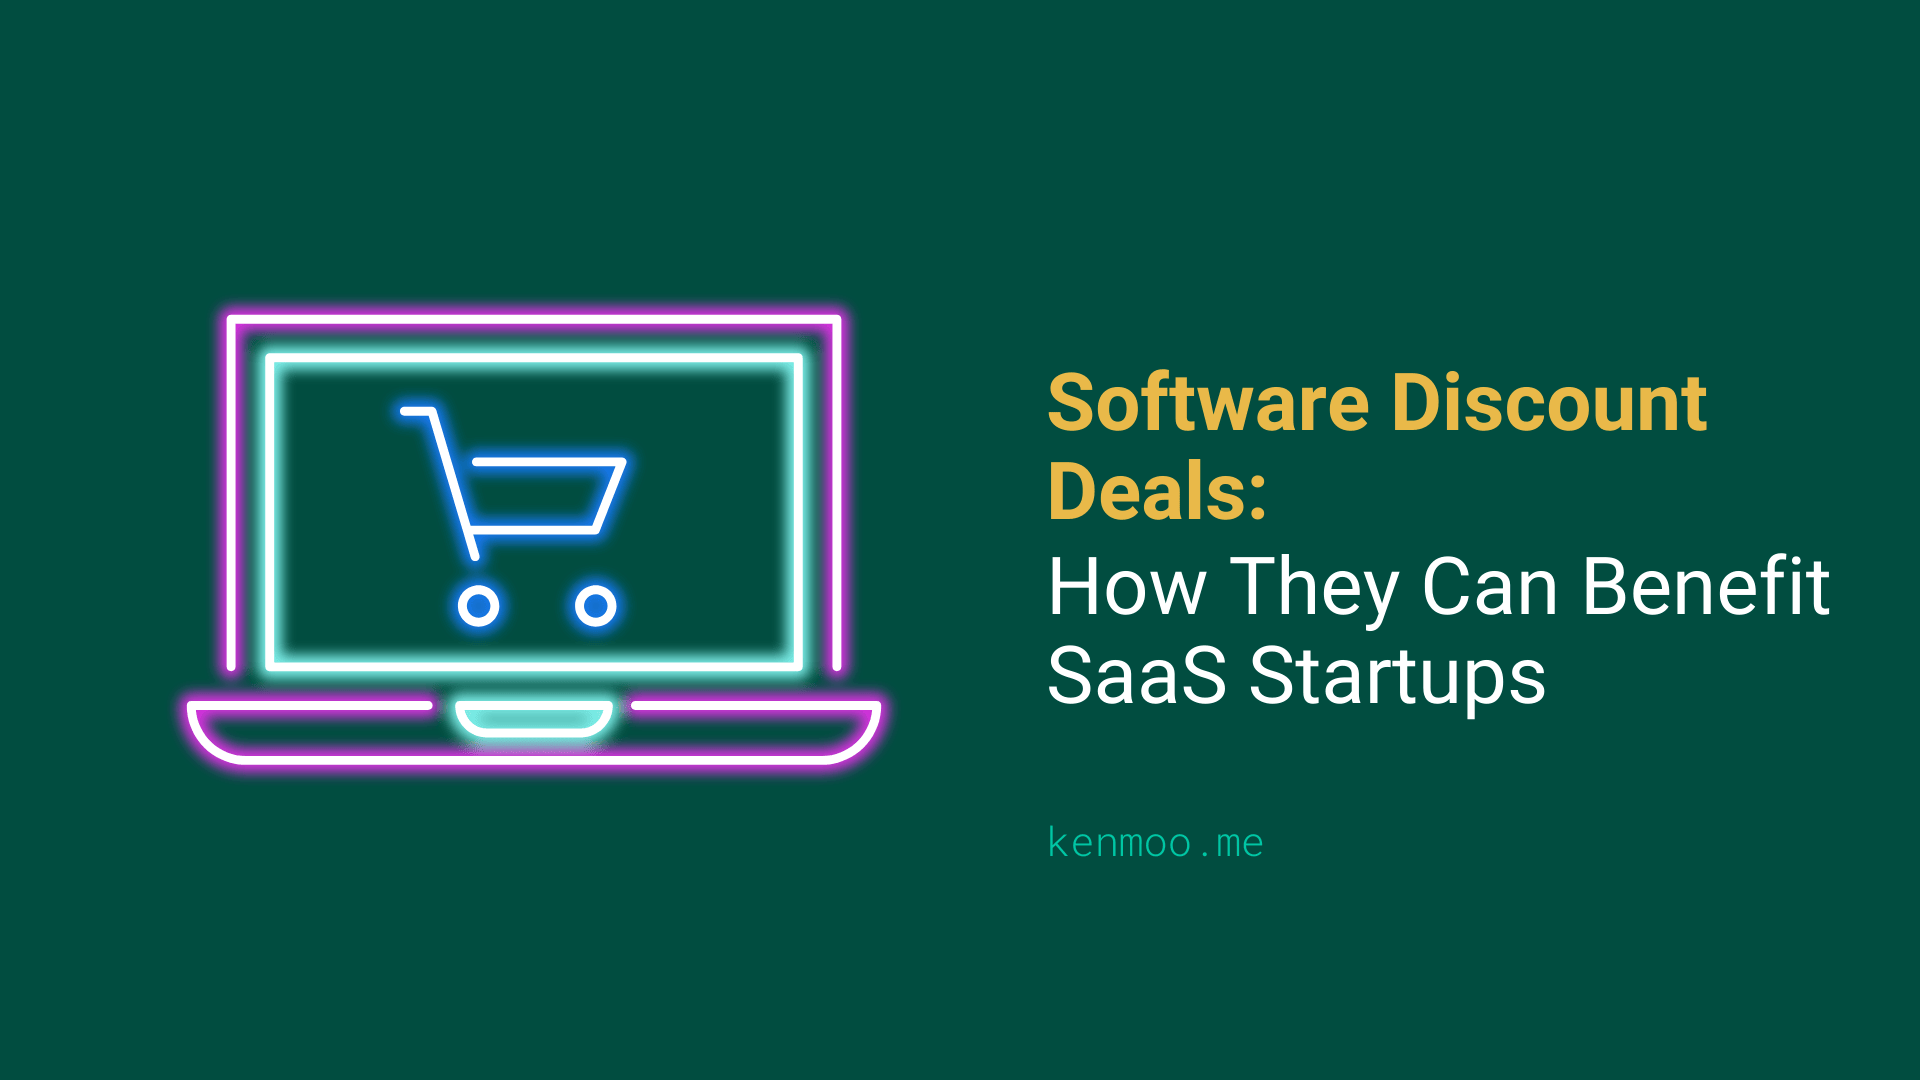 Software Discount Deals: How Can They Benefit SaaS Startups